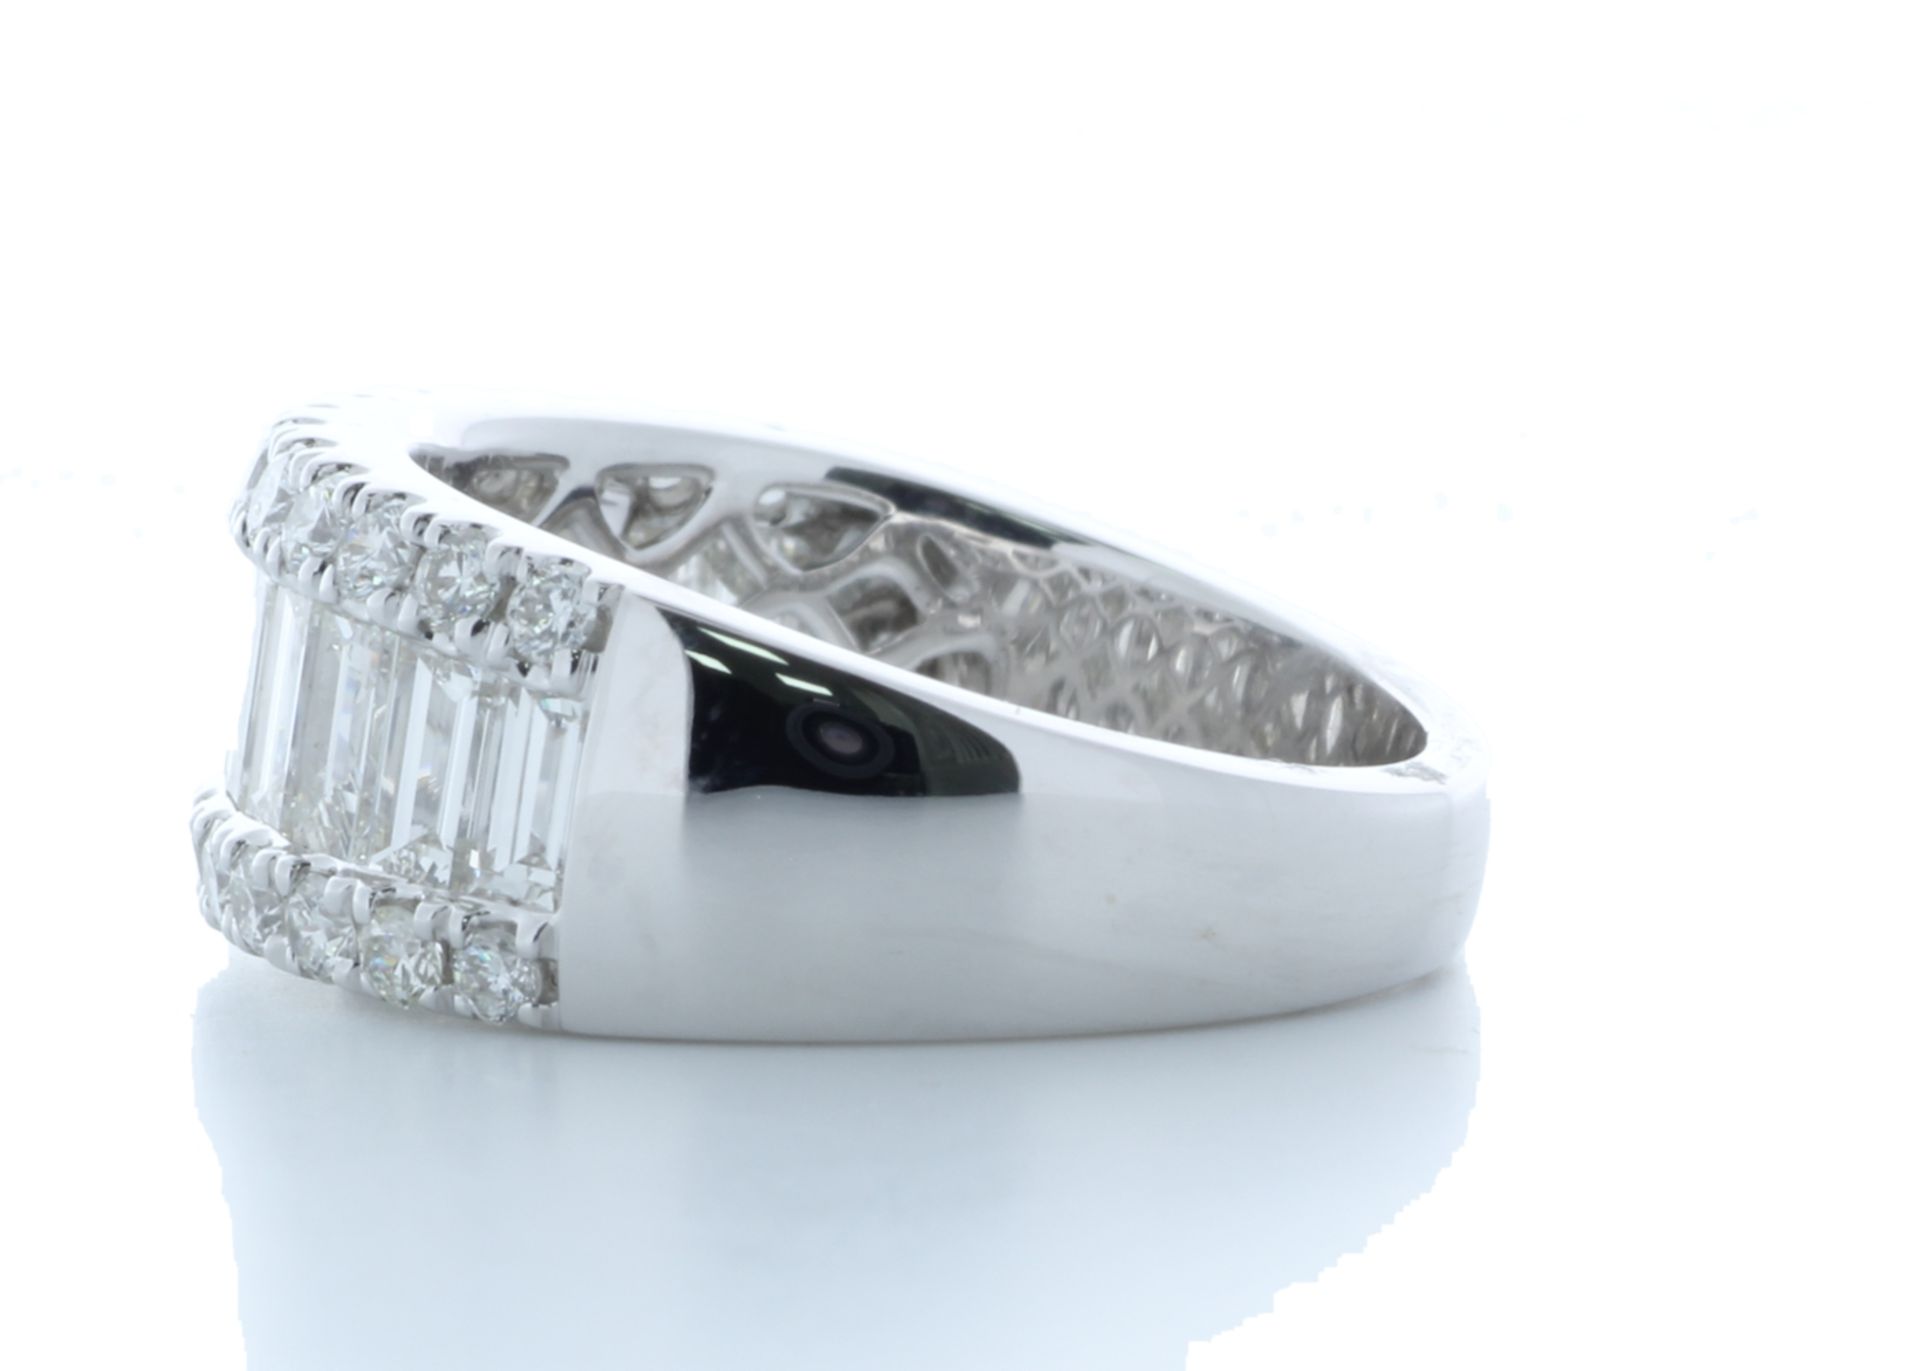 18ct White Gold Channel Set Semi Eternity Diamond Ring 2.34 Carats - Image 2 of 5